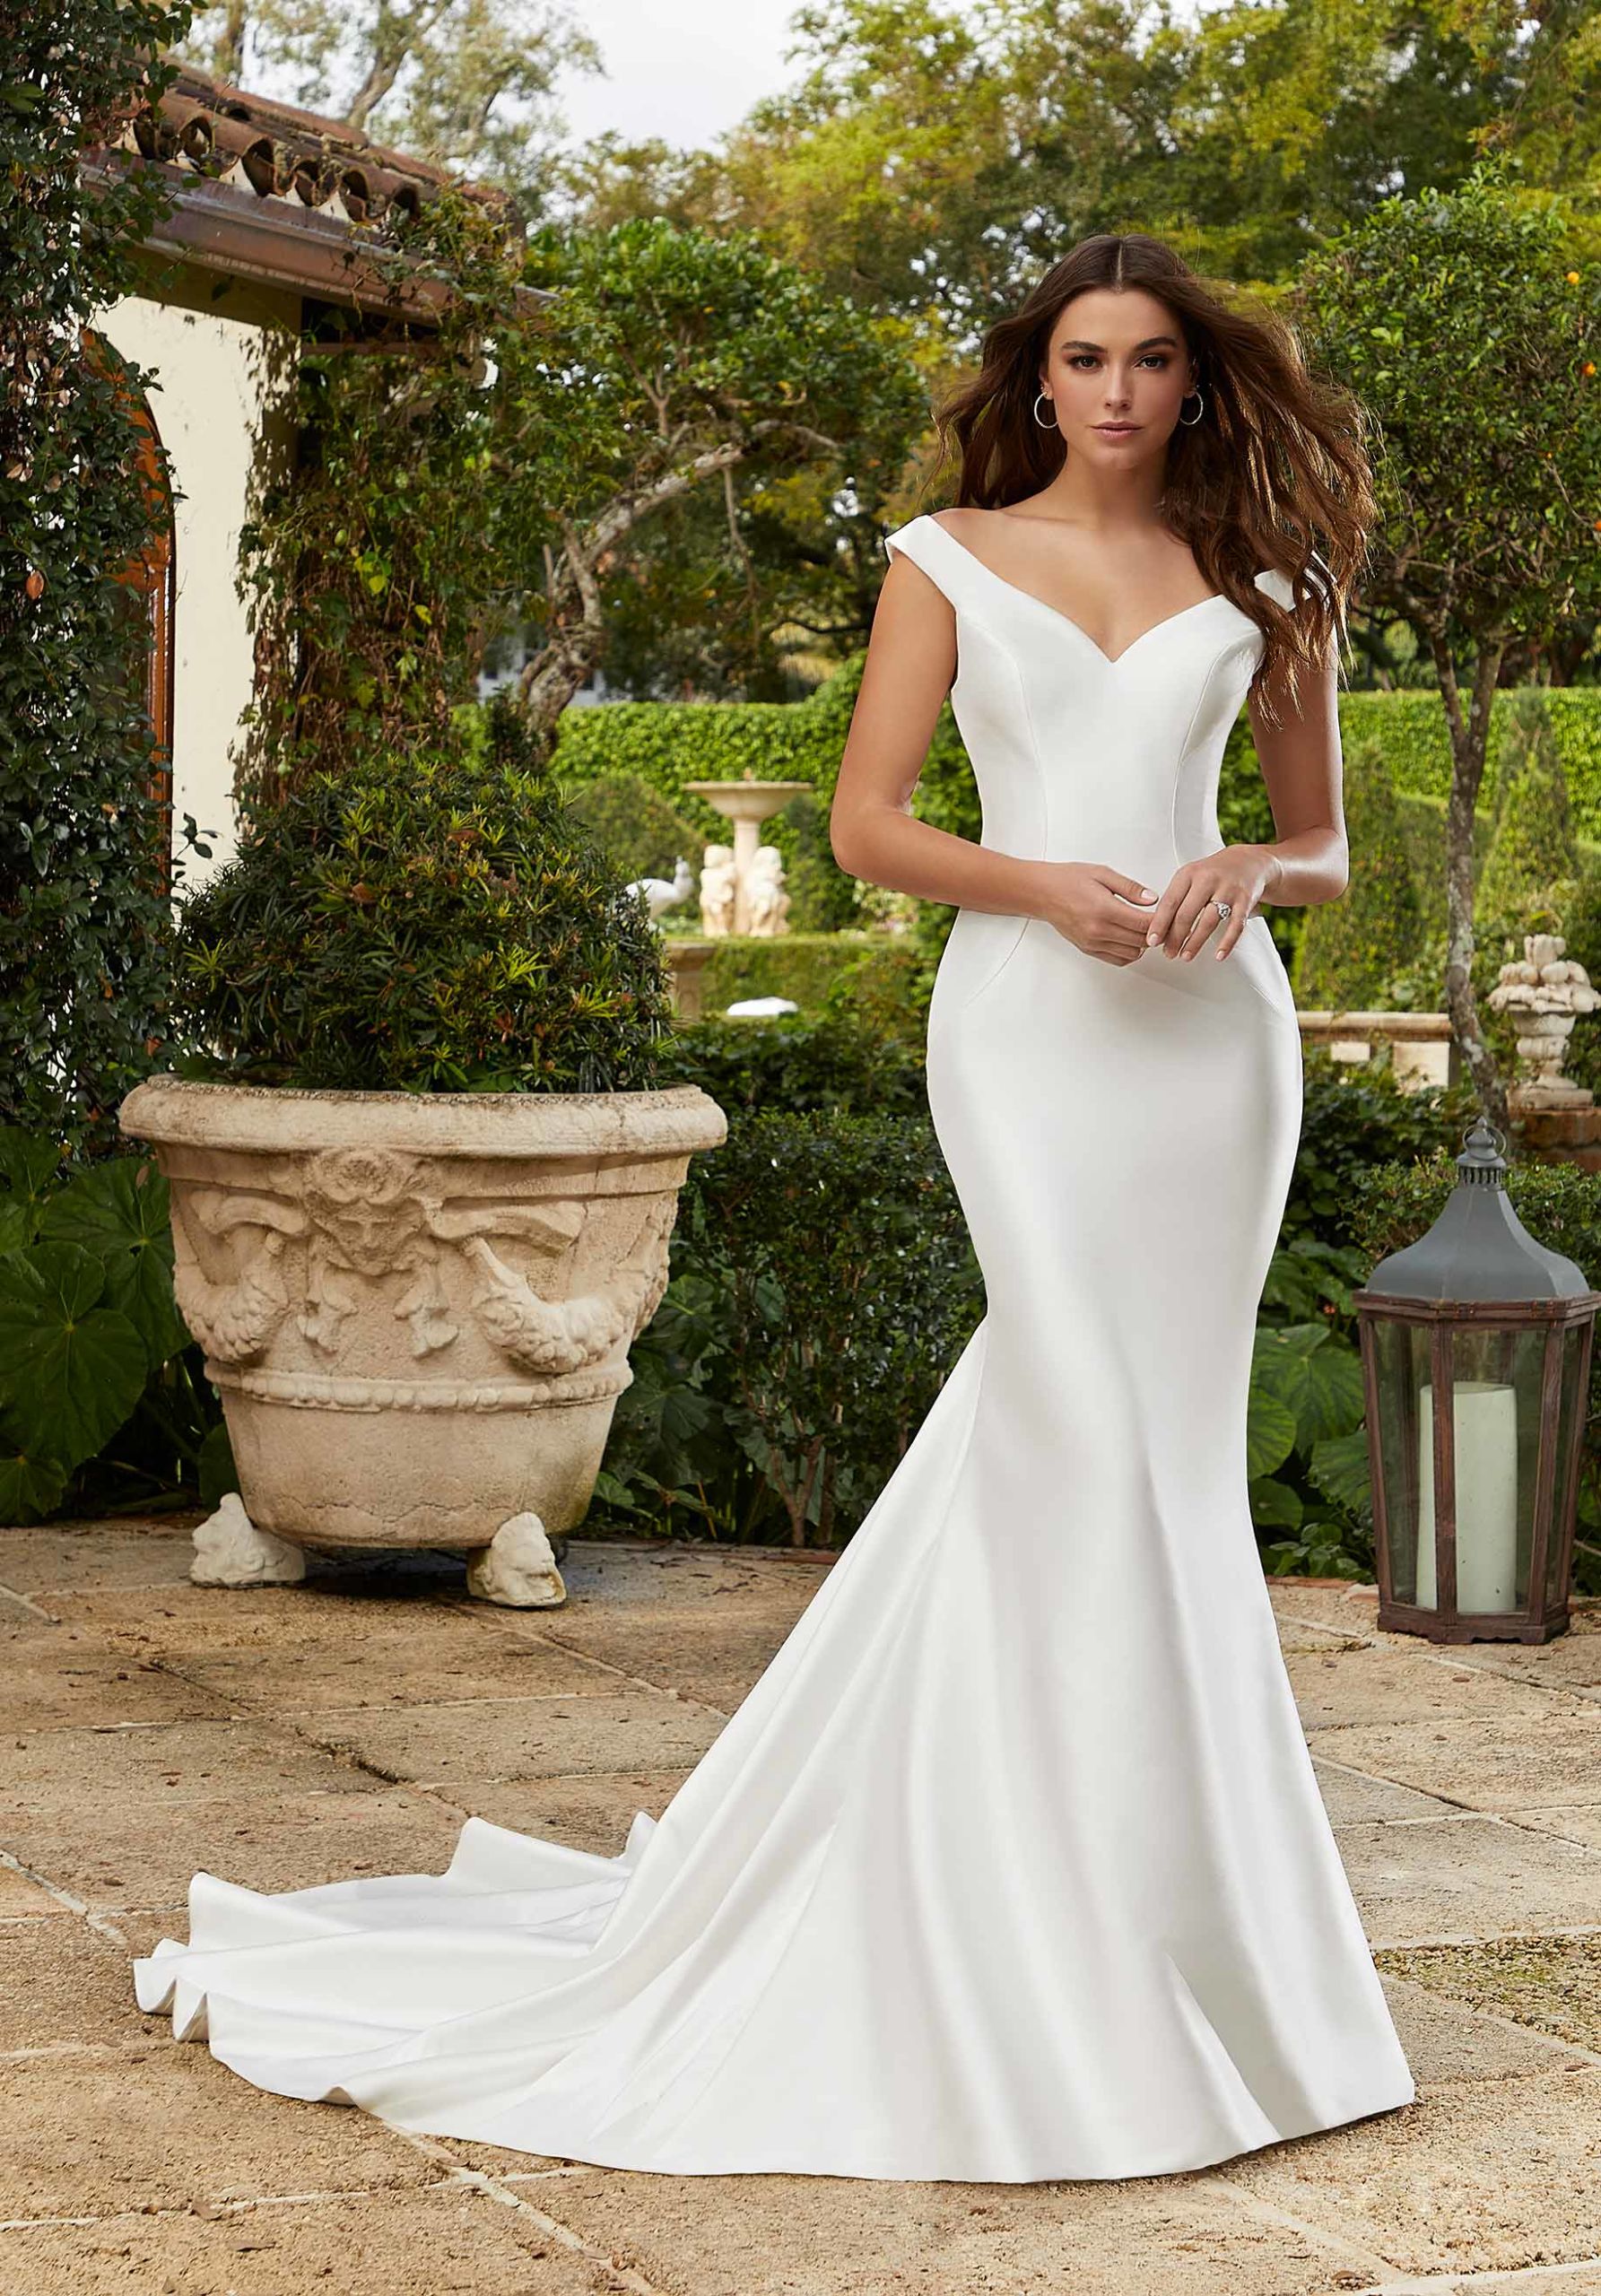 Strapless Mermaid Gowns: Sequined, embellished, and fitted dresses by  Jadore - Fashionably Yours Bridal & Formal Wear